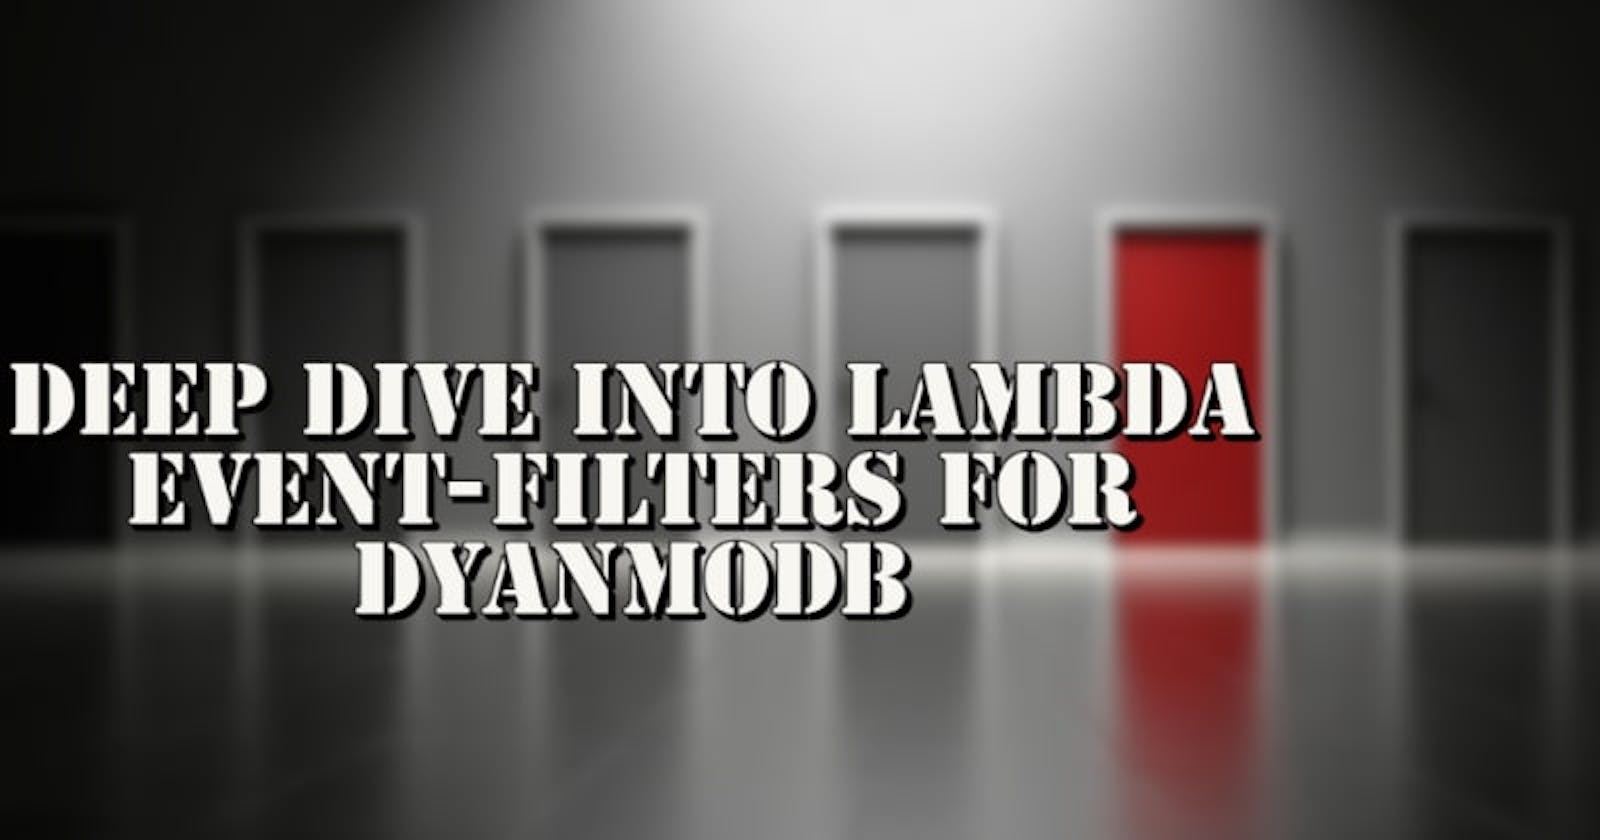 Deep dive into Lambda event-filters for DyanmoDB